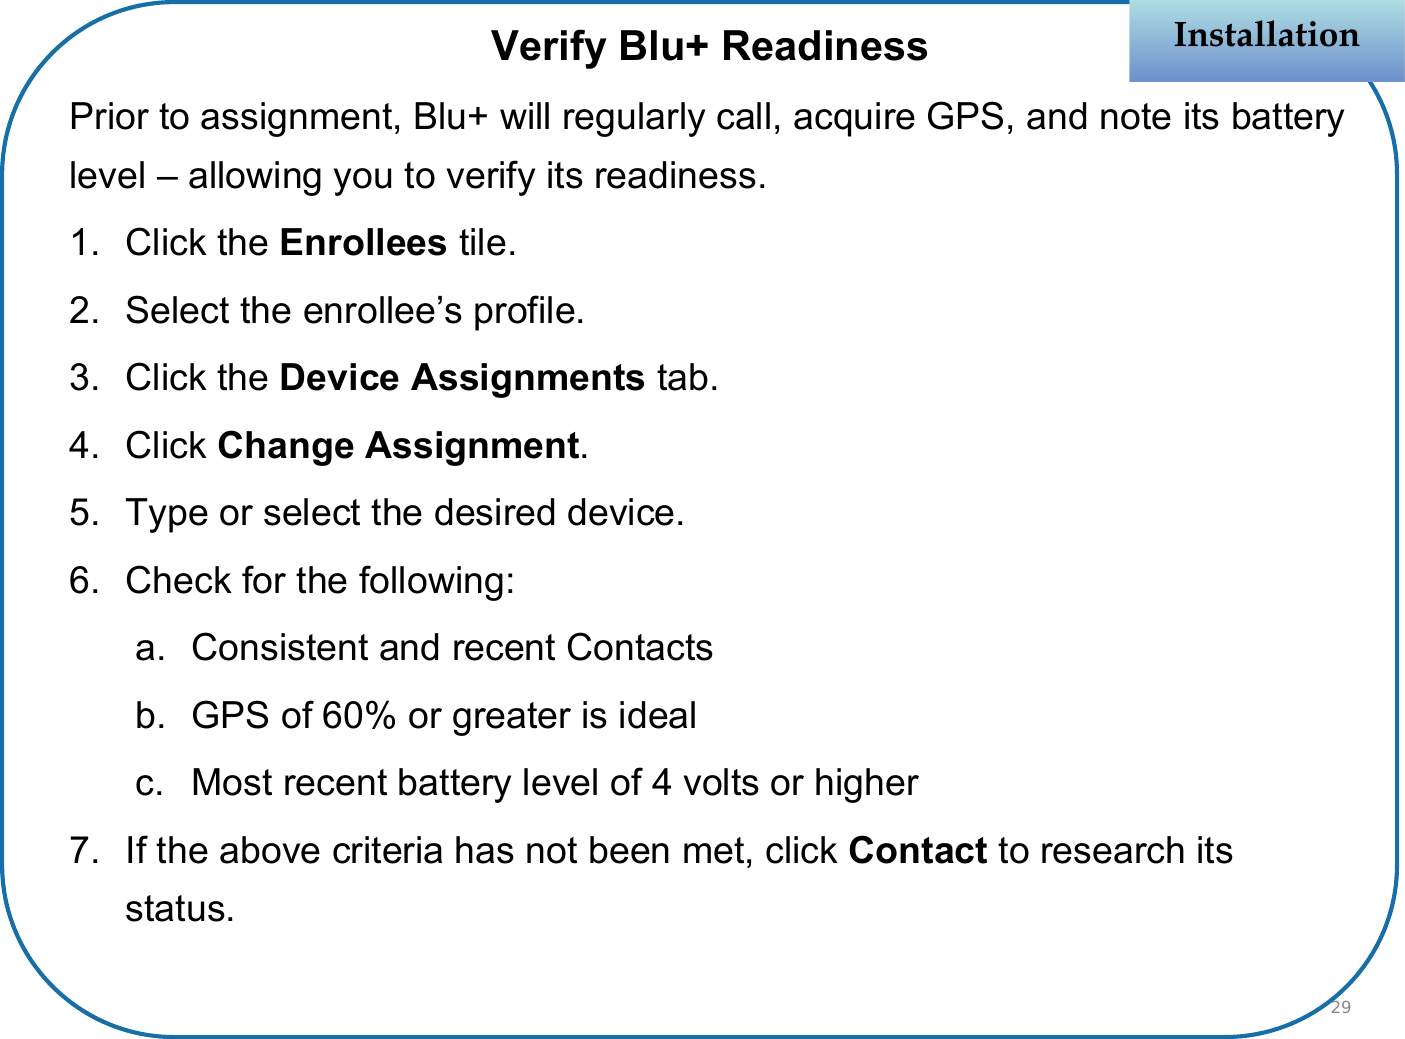 Verify Blu+ ReadinessPrior to assignment, Blu+ will regularly call, acquire GPS, and note its battery level – allowing you to verify its readiness.1. Click the Enrollees tile.2. Select the enrollee’s profile.3. Click the Device Assignments tab.4. Click Change Assignment.5. Type or select the desired device.6. Check for the following:a. Consistent and recent Contactsb. GPS of 60% or greater is idealc. Most recent battery level of 4 volts or higher7. If the above criteria has not been met, click Contact to research its status.InstallationInstallation29